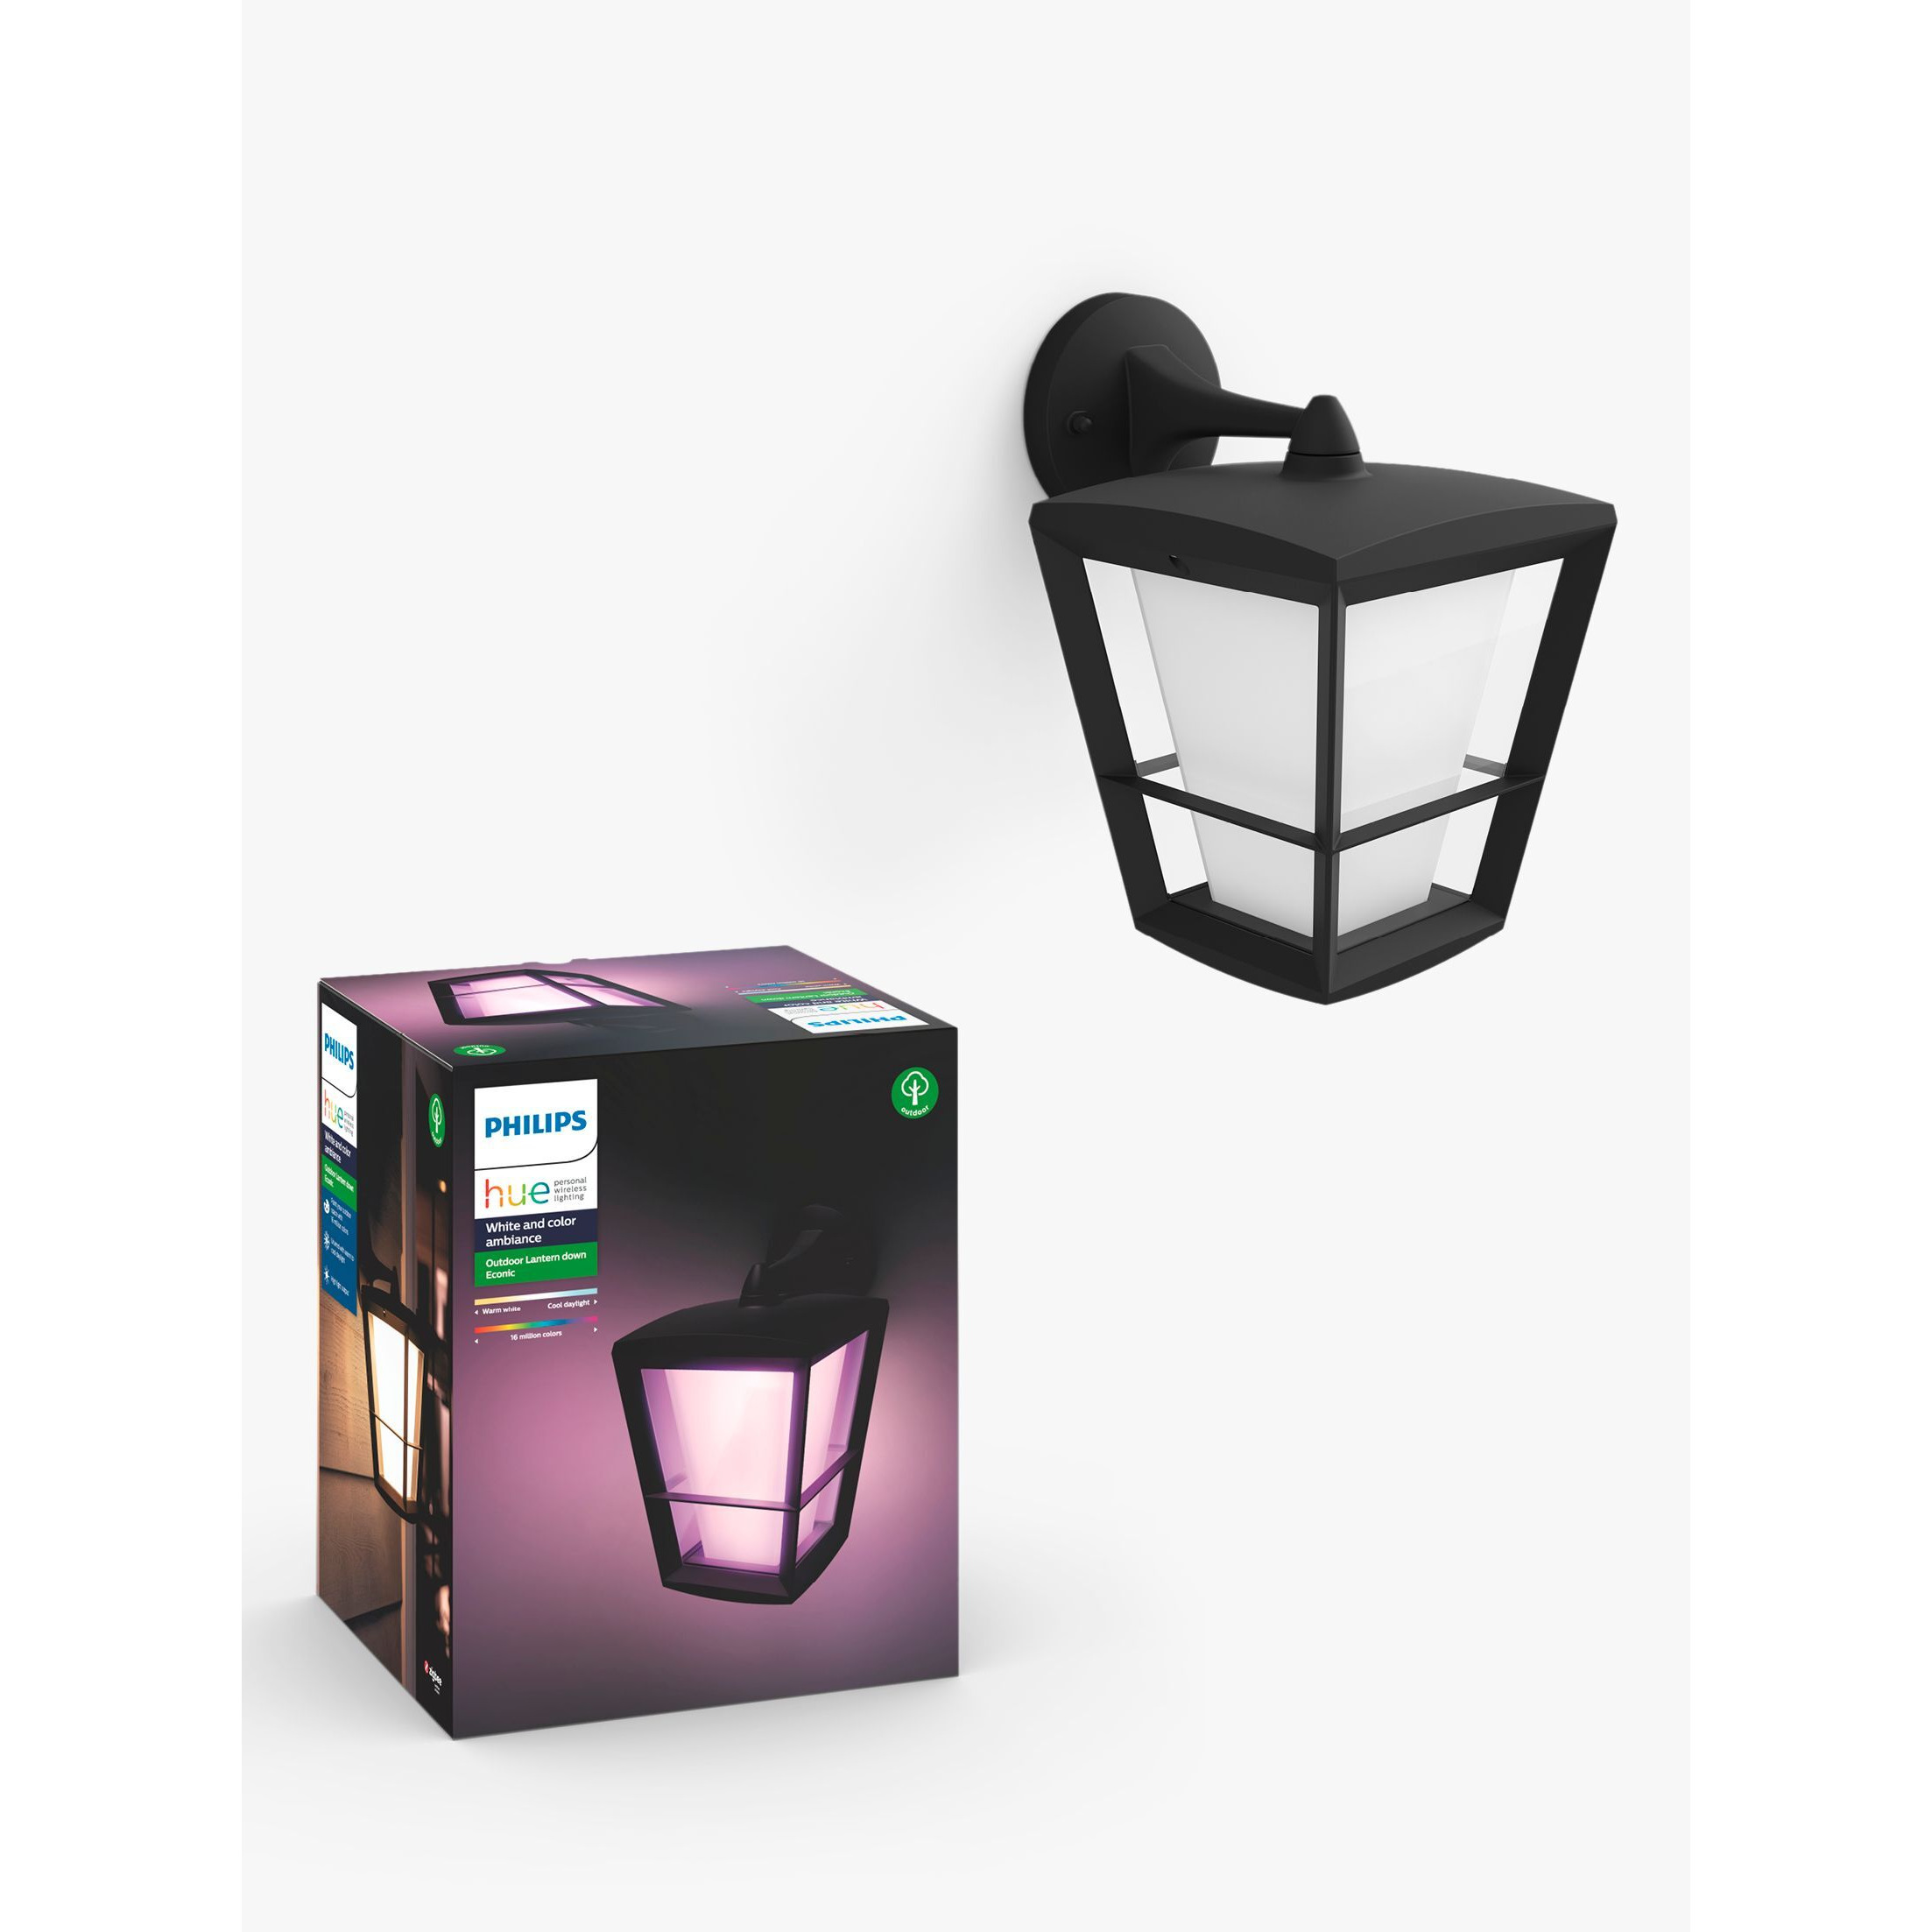 Philips Hue White and Colour Ambiance Econic LED Smart Outdoor Wall Lantern, Black - image 1